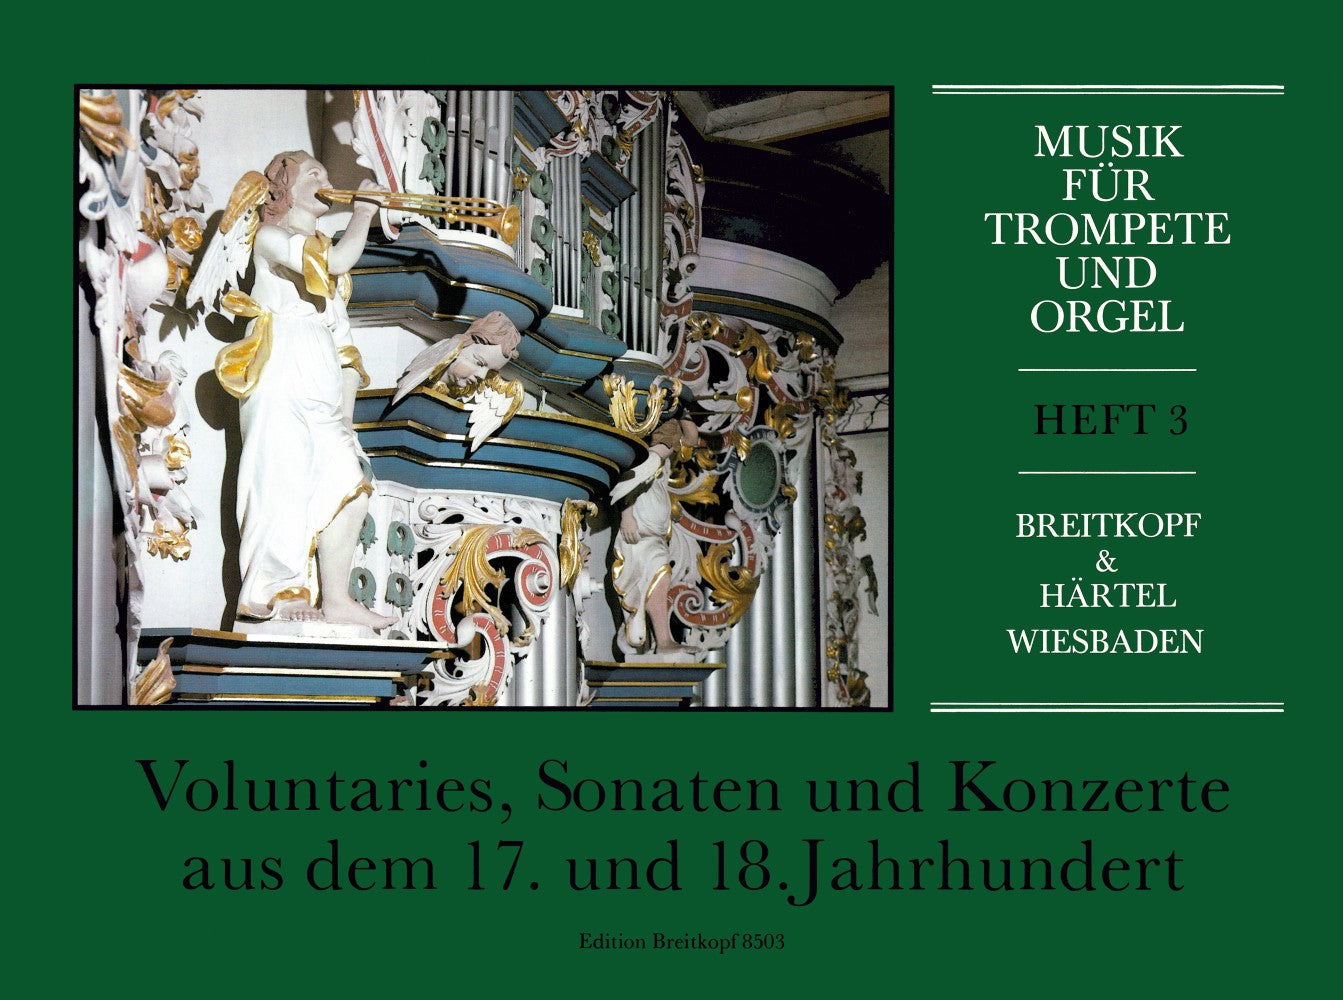 Music for Trumpet and Organ - Volume 3 (Voluntaries, Sonatas & Concerti from the 17th and 18th Century)